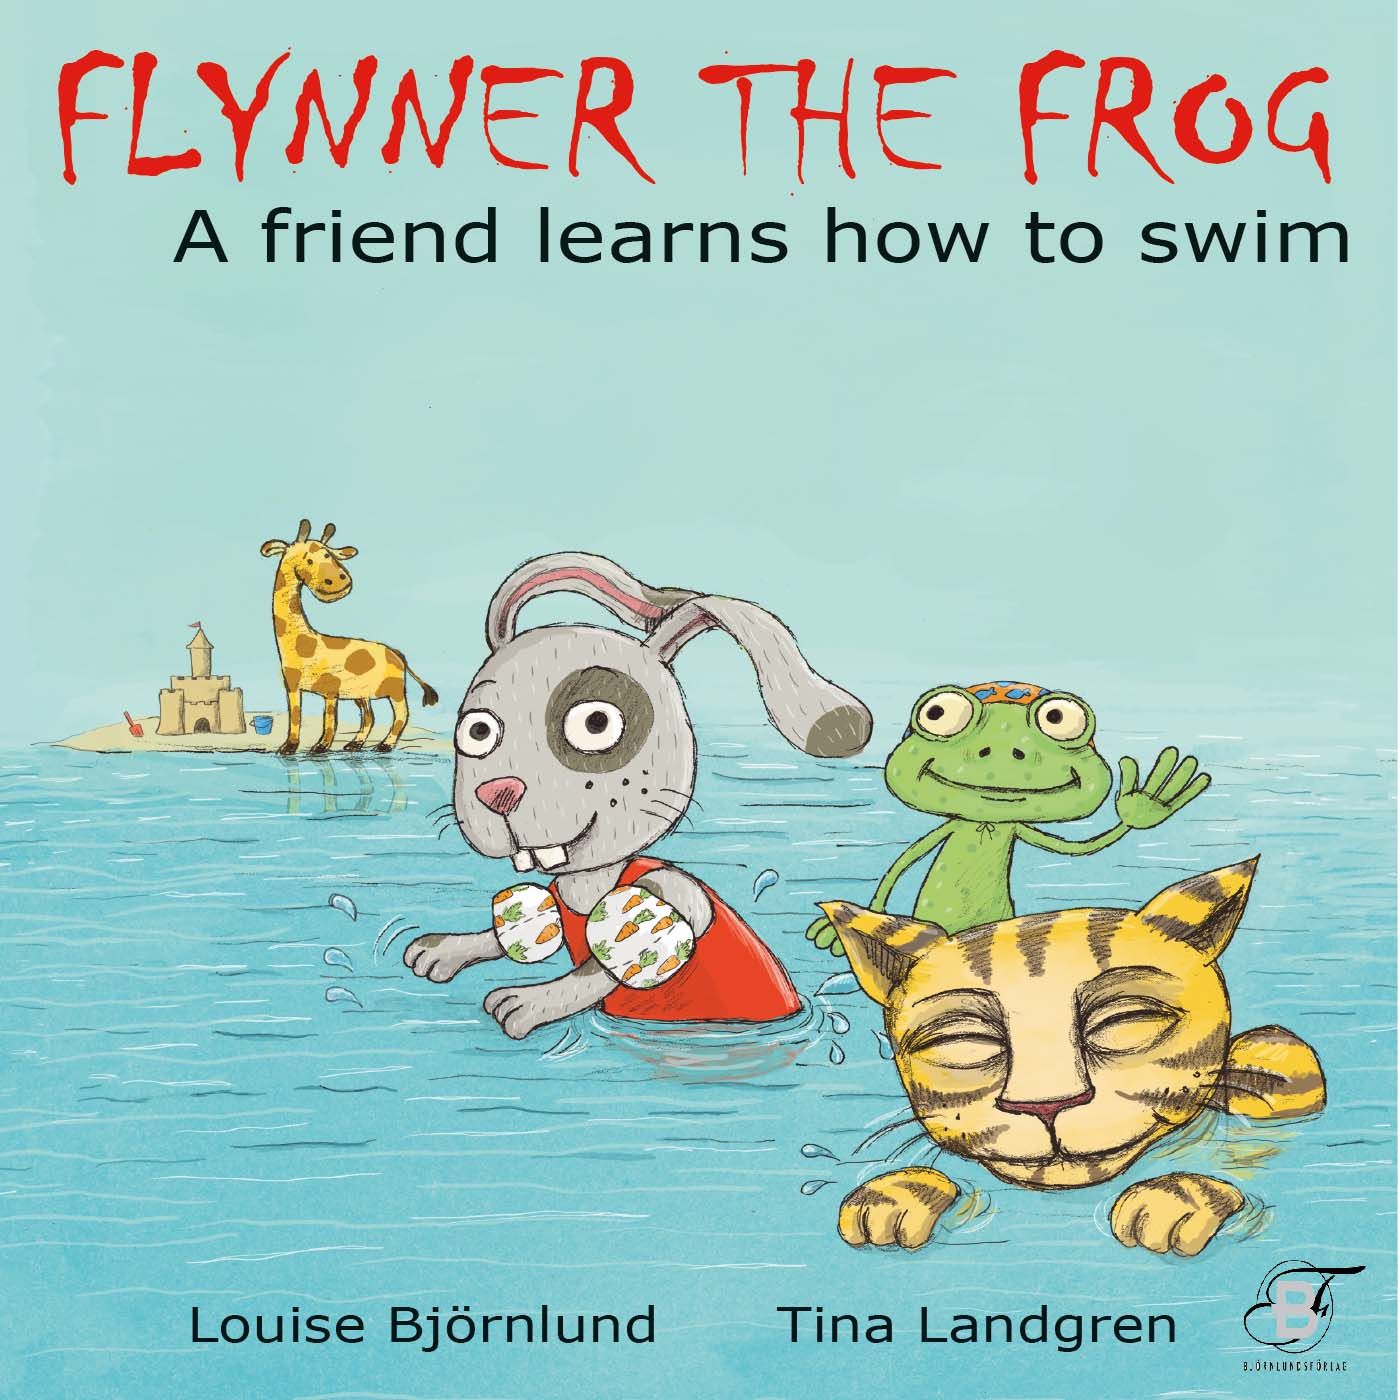 Flynner the frog : A friend learns how to swim